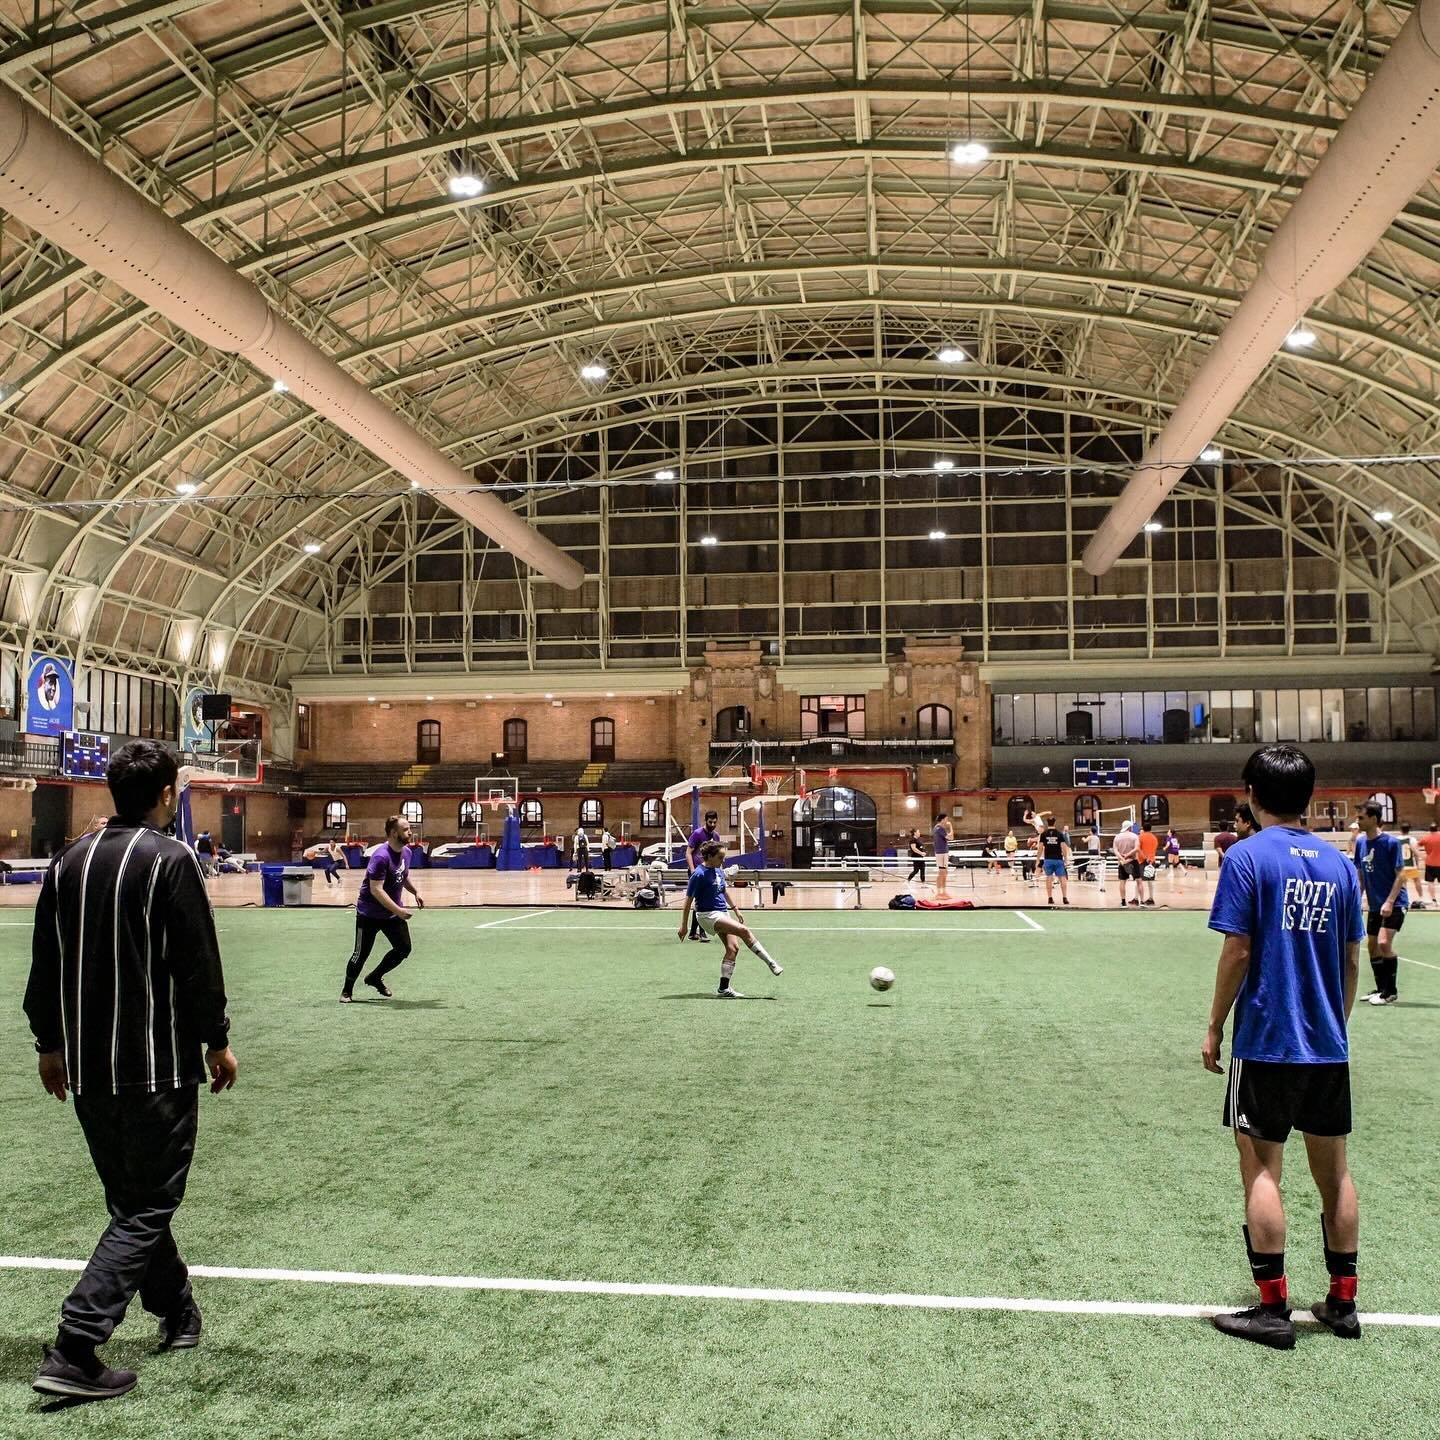 Summer soccer 🤝 AC 

Solidify your place in the cool🧊 kids club this summer season and register now for one of our open (and air conditioned) indoor leagues:

🗓️Bedford Armory Tuesday P2
🗓️Bedford Armory Tuesday P5
🗓️Chelsea Piers Thursday P5
🗓